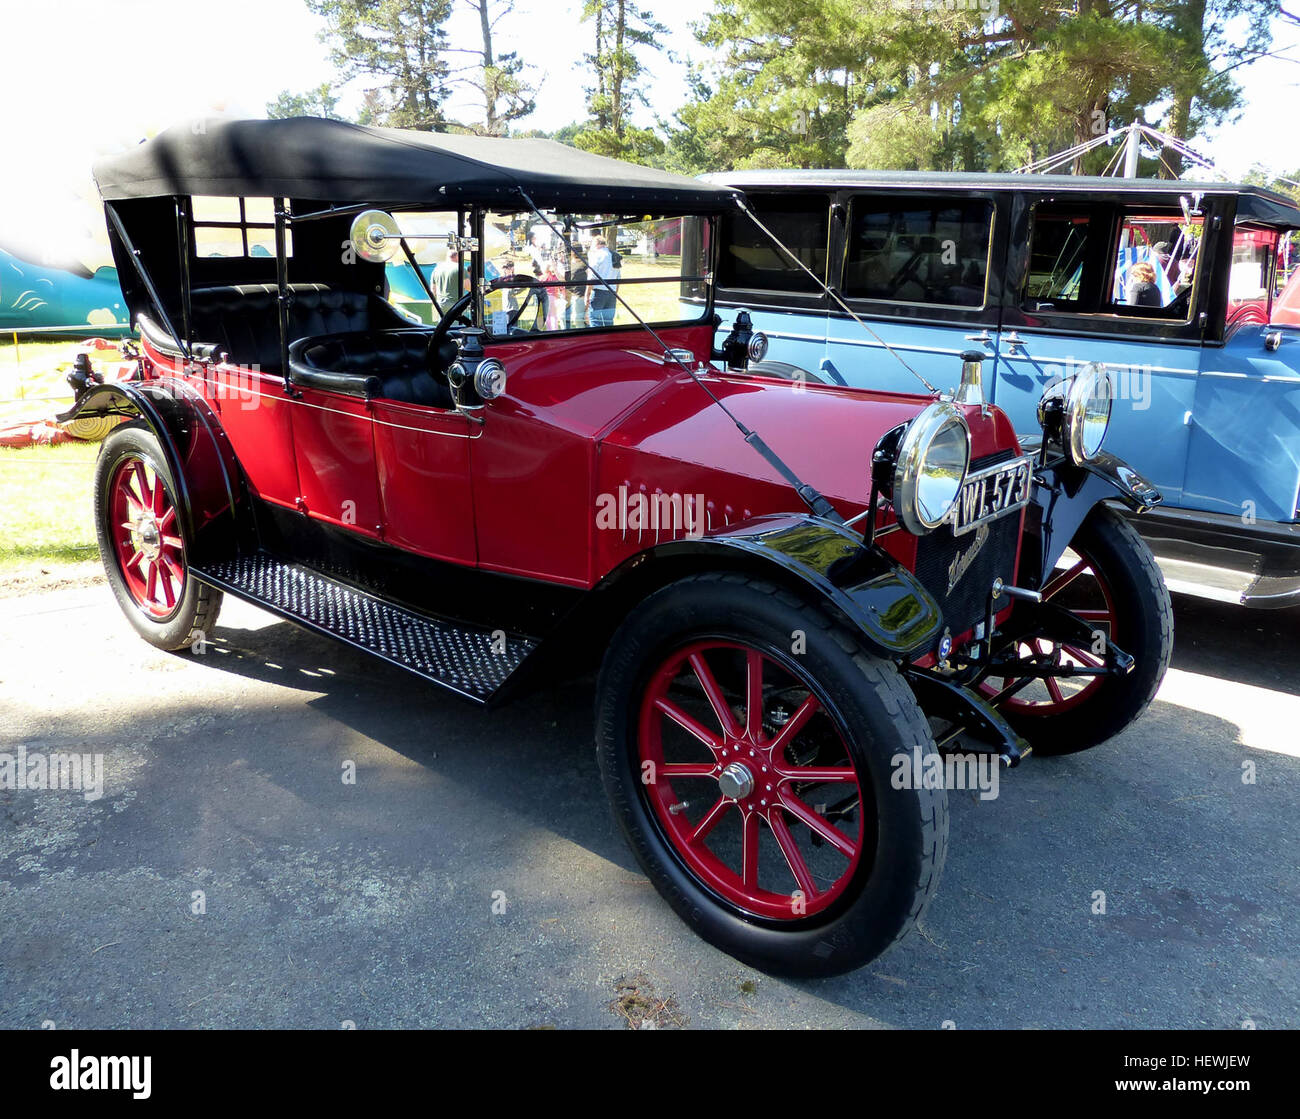 Robert Craig Hupp debuted the first Hupmobile in 1909. Despite being produced for the lower-price class, the Hupmobile featured a two-speed sliding gear transmission and high tension magneto. Following Hupp's departure from the company in 1911, Hupmobile underwent a transformation and became a fairly successful car company. The Model 32, a larger and more powerful vehicle than its predecessor, debuted in 1912 and sold well over the next few years. Stock Photo